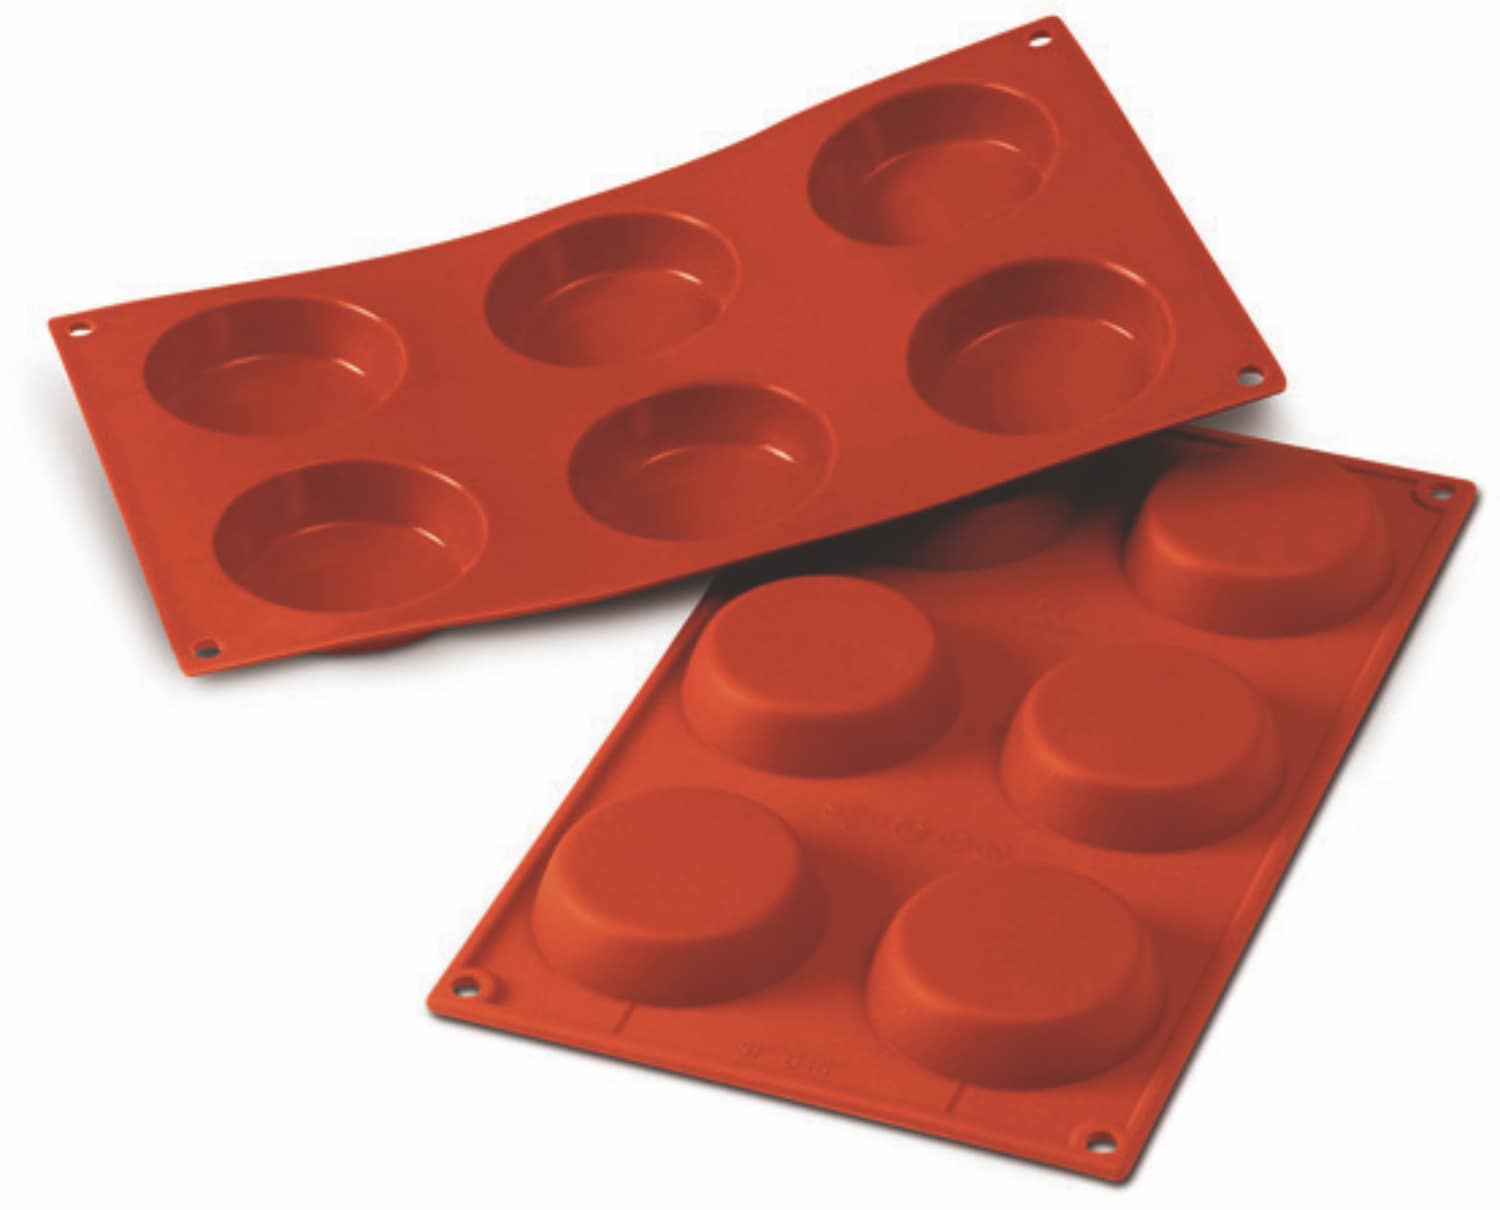 Silicone baking moulds "Flan" 300 x 175 mm